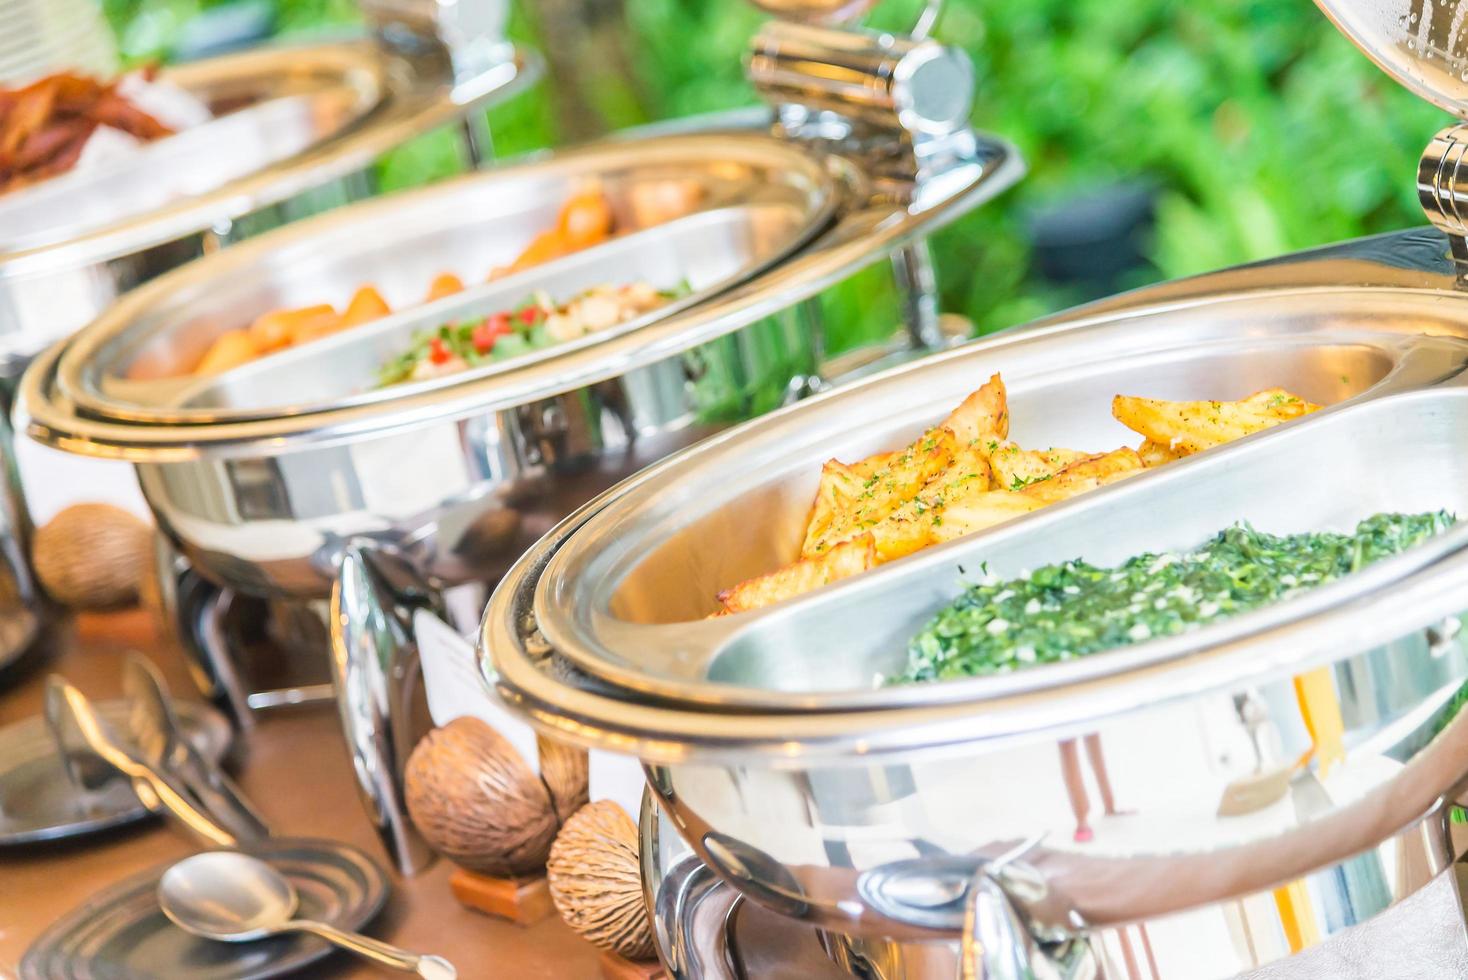 Selective focus point on Catering buffet food in restaurant photo